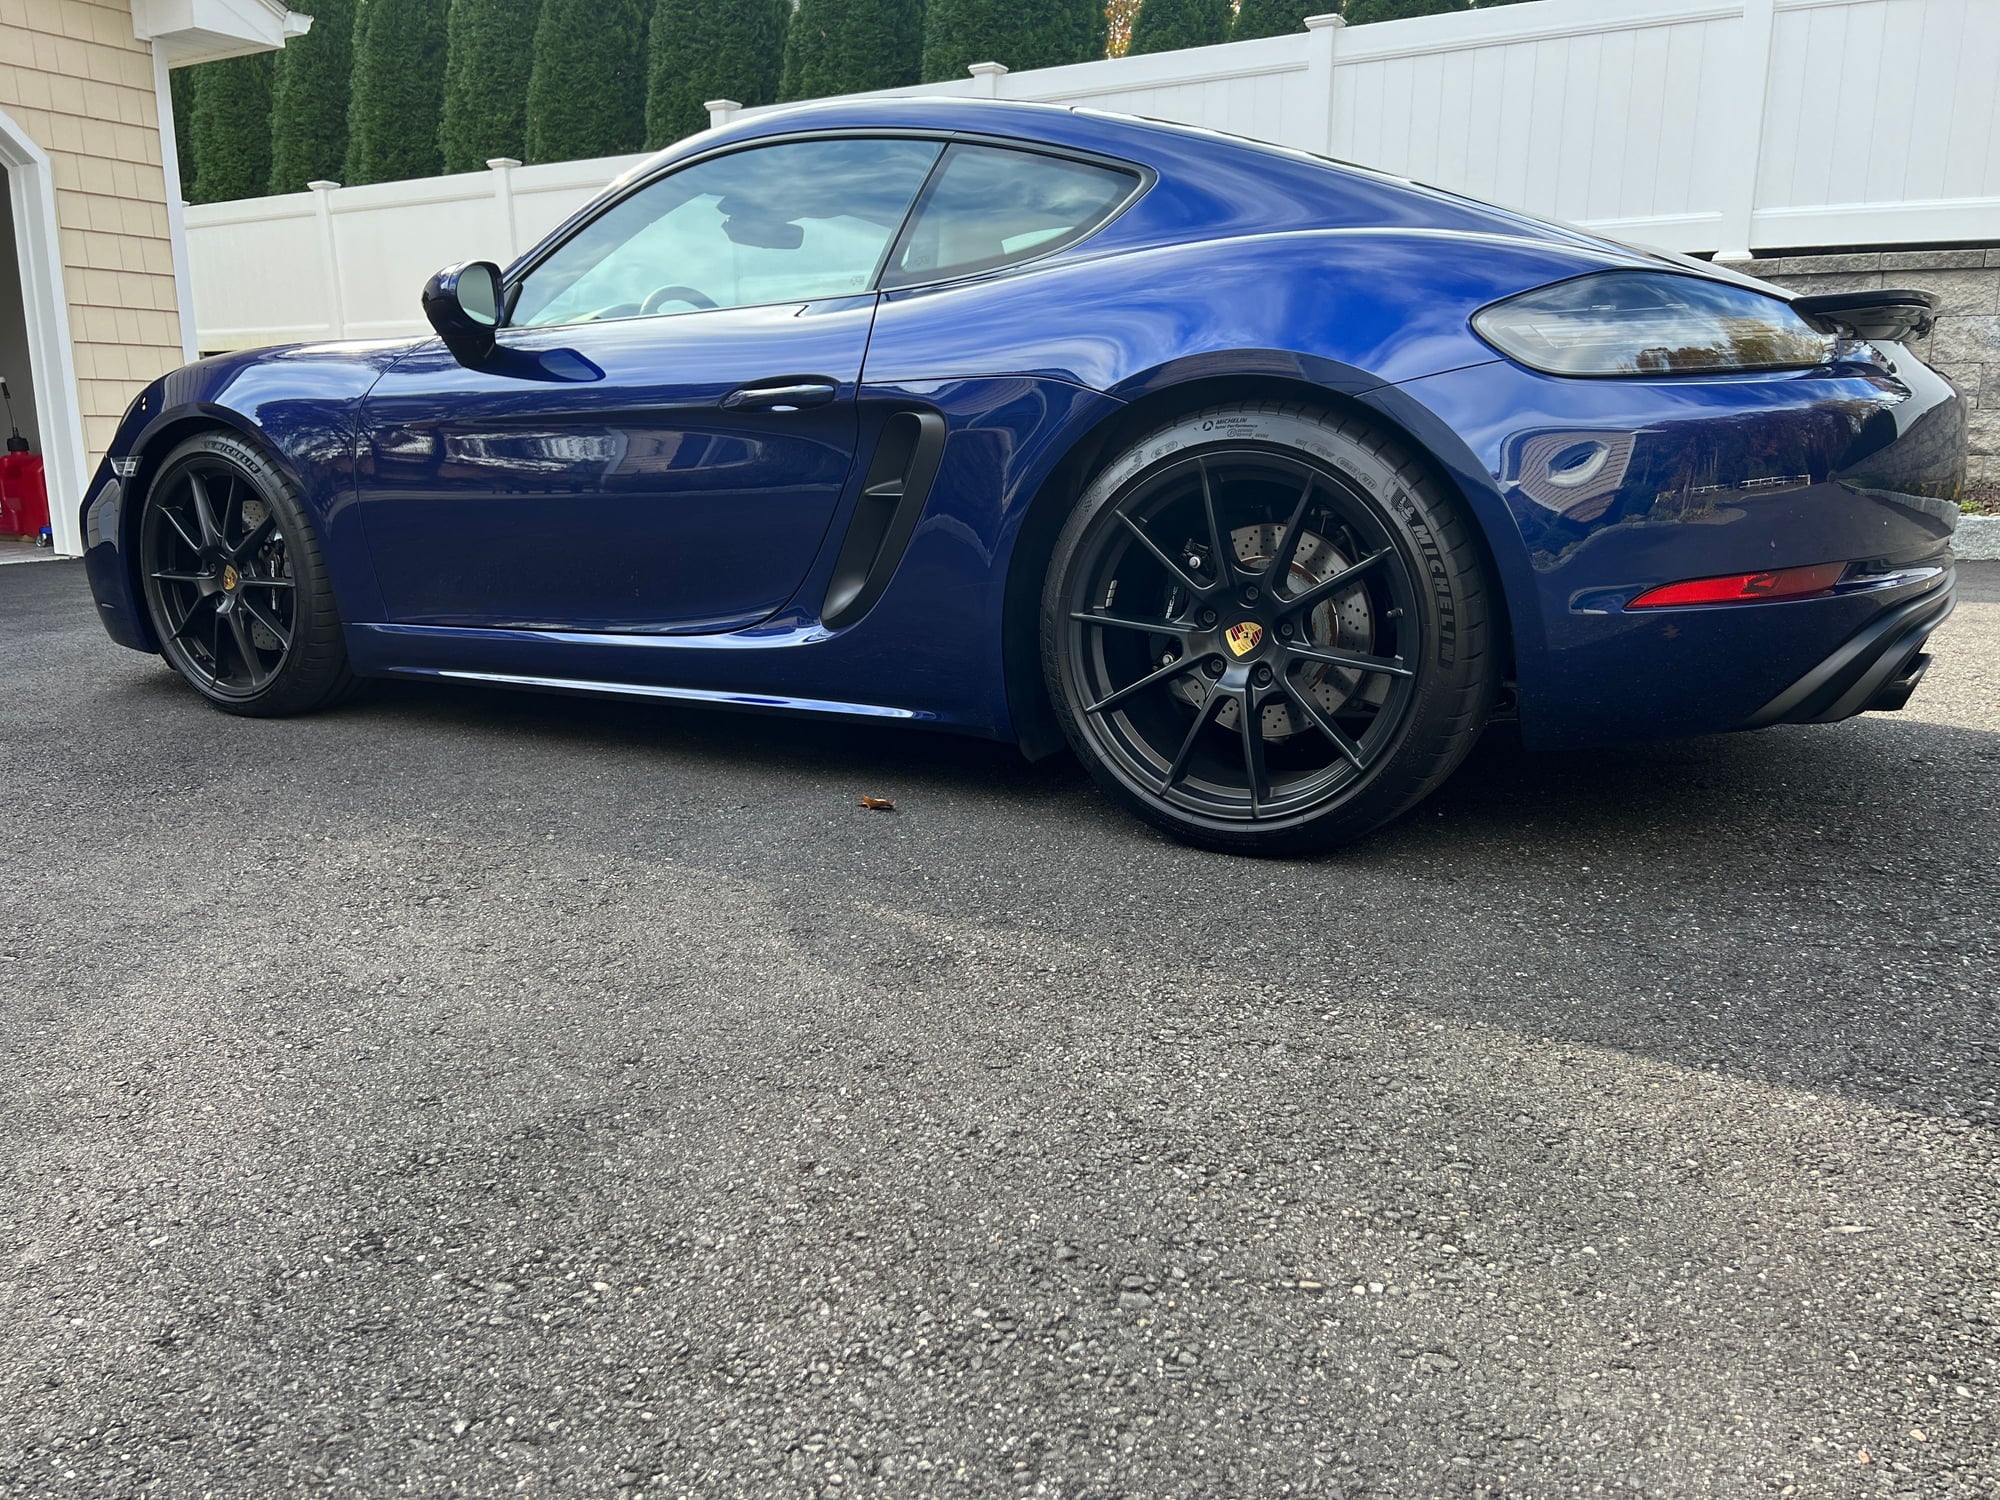 2021 Porsche 718 Cayman - 2021 Cayman GTS 4.0 PDK CPO  7307 miles $99,000 - Used - VIN WPOAD2A87MS281314 - 7,307 Miles - 6 cyl - 2WD - Automatic - Blue - Deer Park, NY 11729, United States